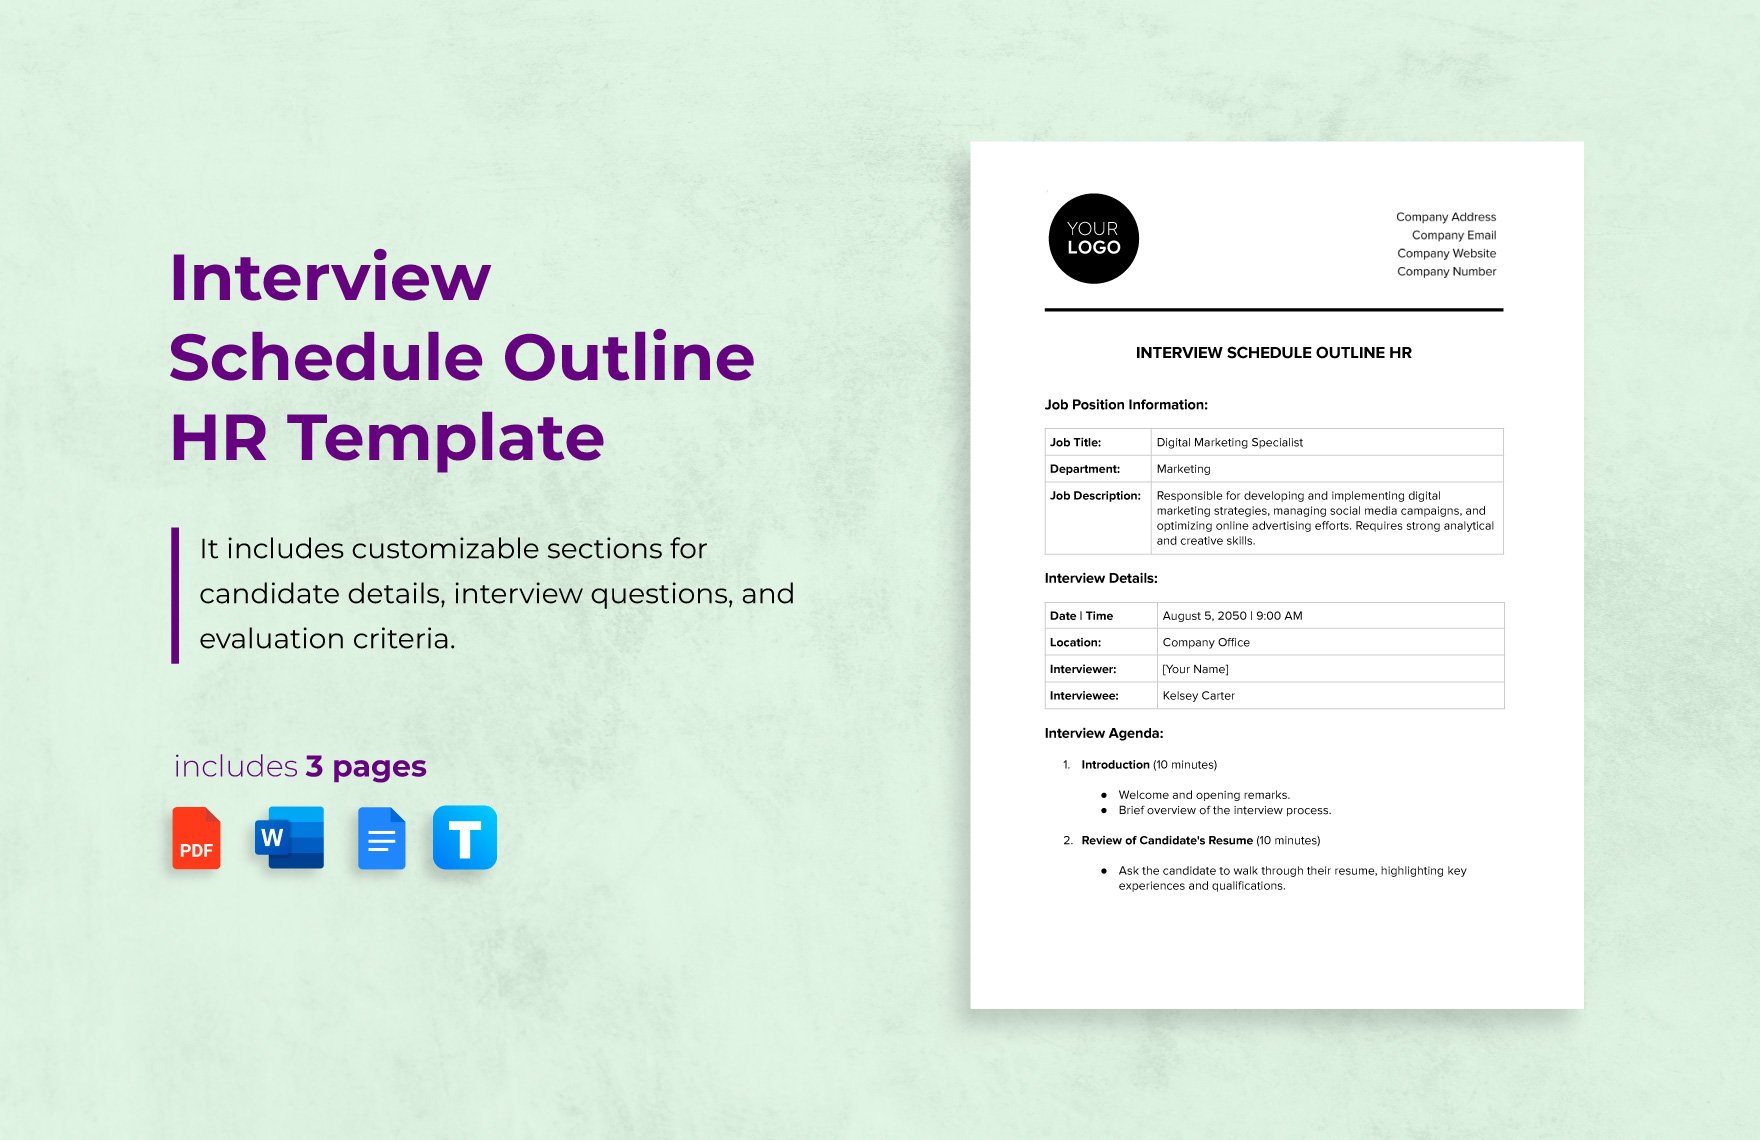 Interview Schedule Outline HR Template in Word, Google Docs, PDF